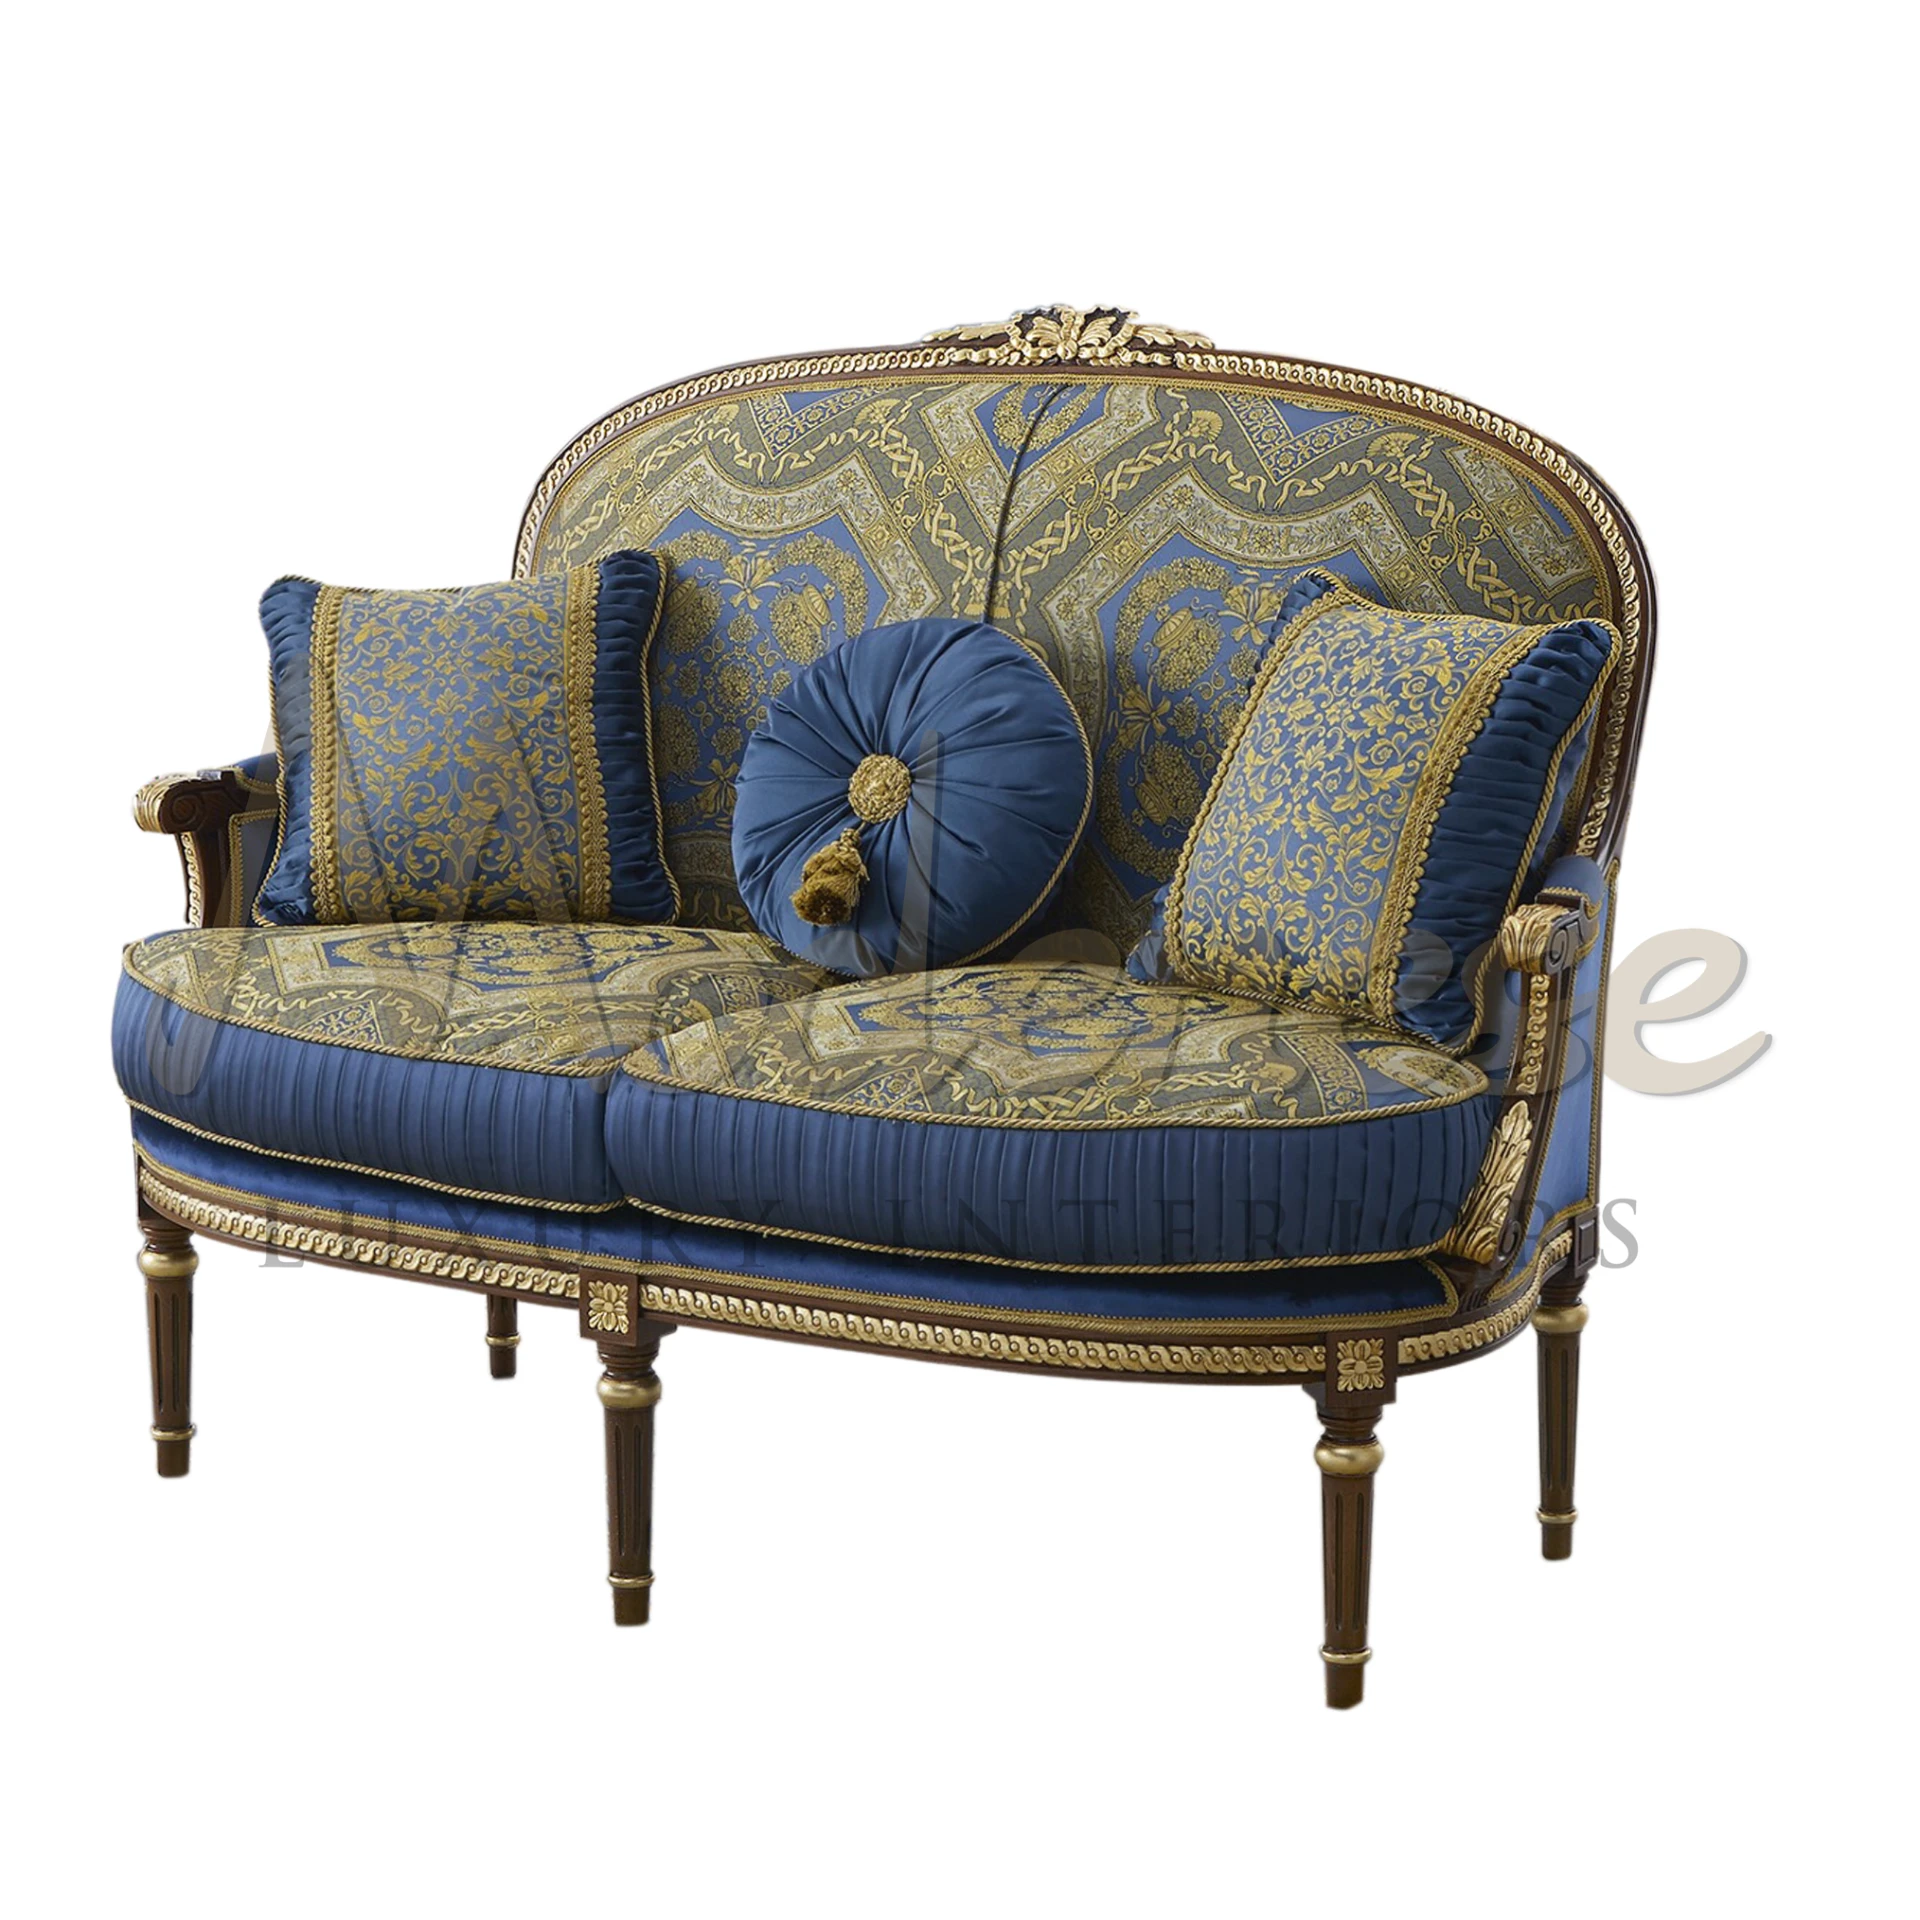  Royal Classic Duo Sofa with gold leaf carvings, embodying luxury Italian design for the most sophisticated interiors.